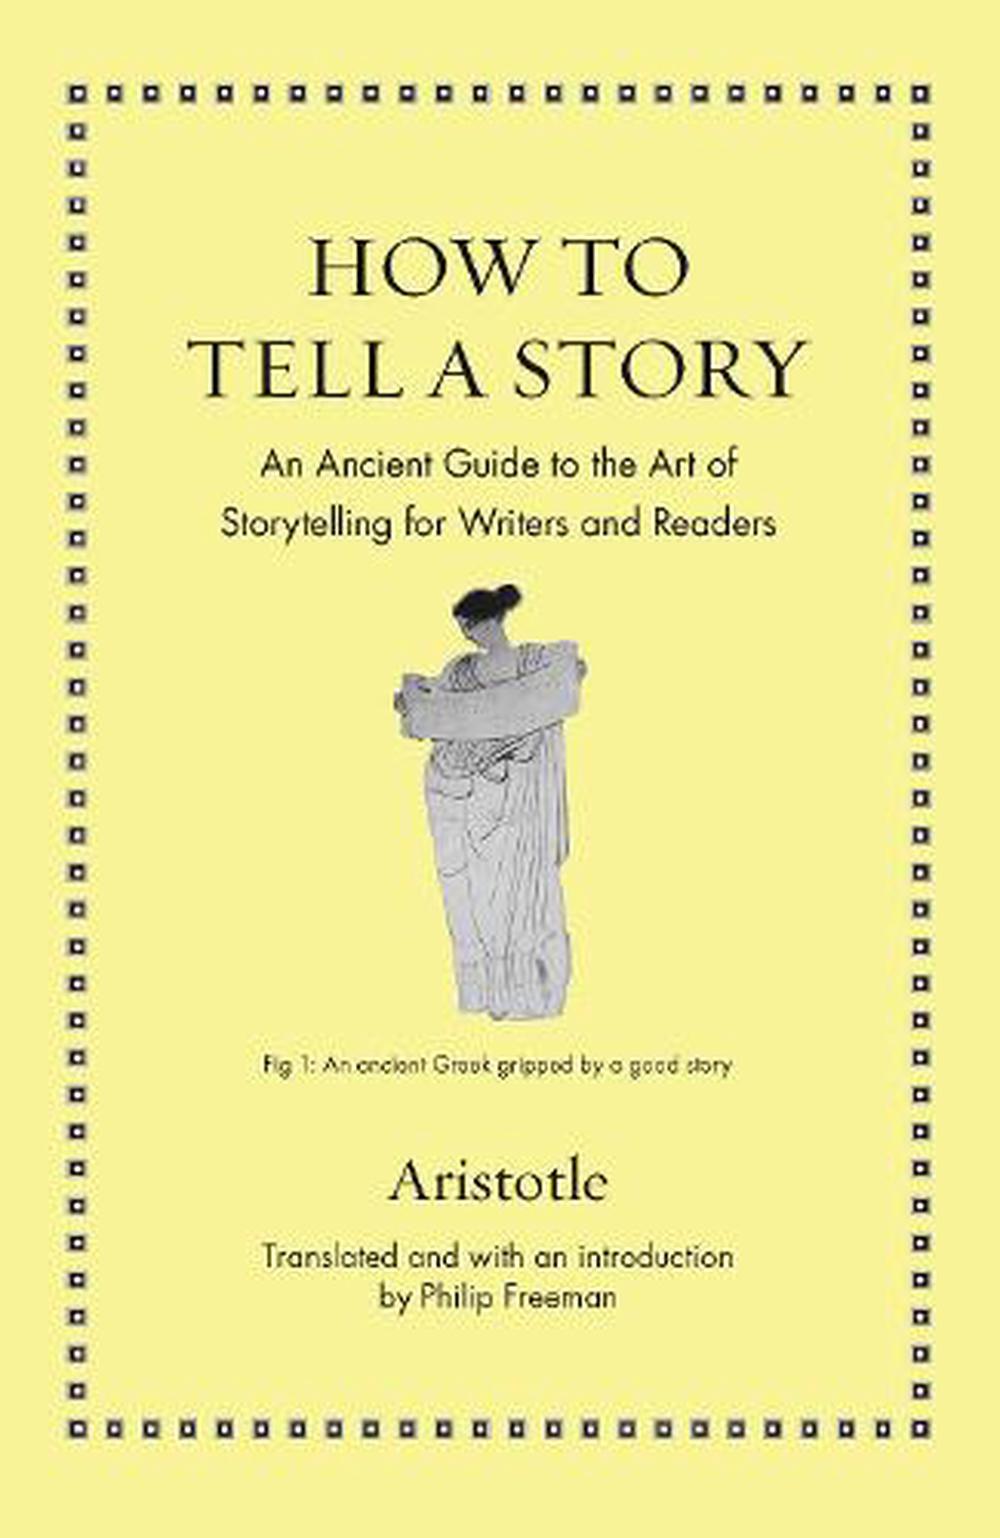 How to Tell A Story: An Ancient Guide to the Art of Storytelling for Writers and Readers